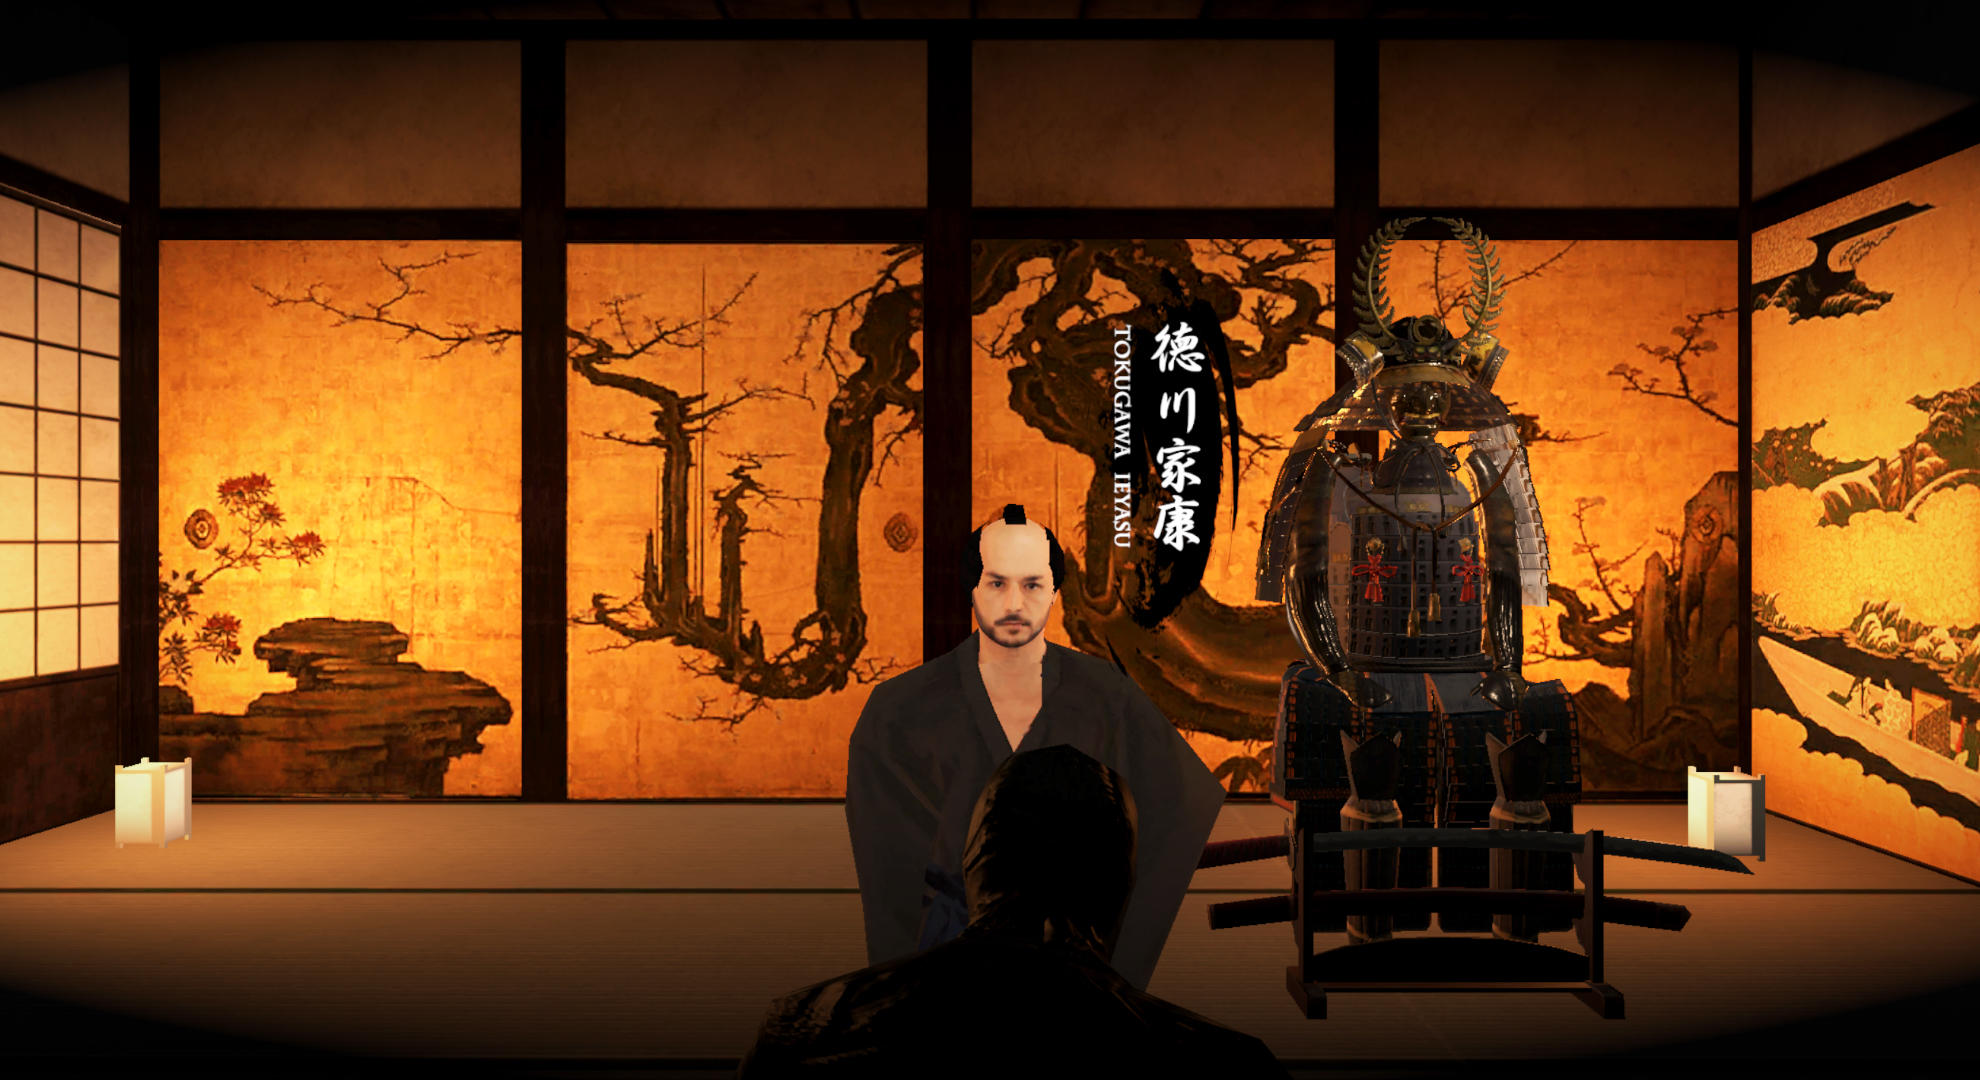 Ninja Assassin - Stealth Game APK for Android Download